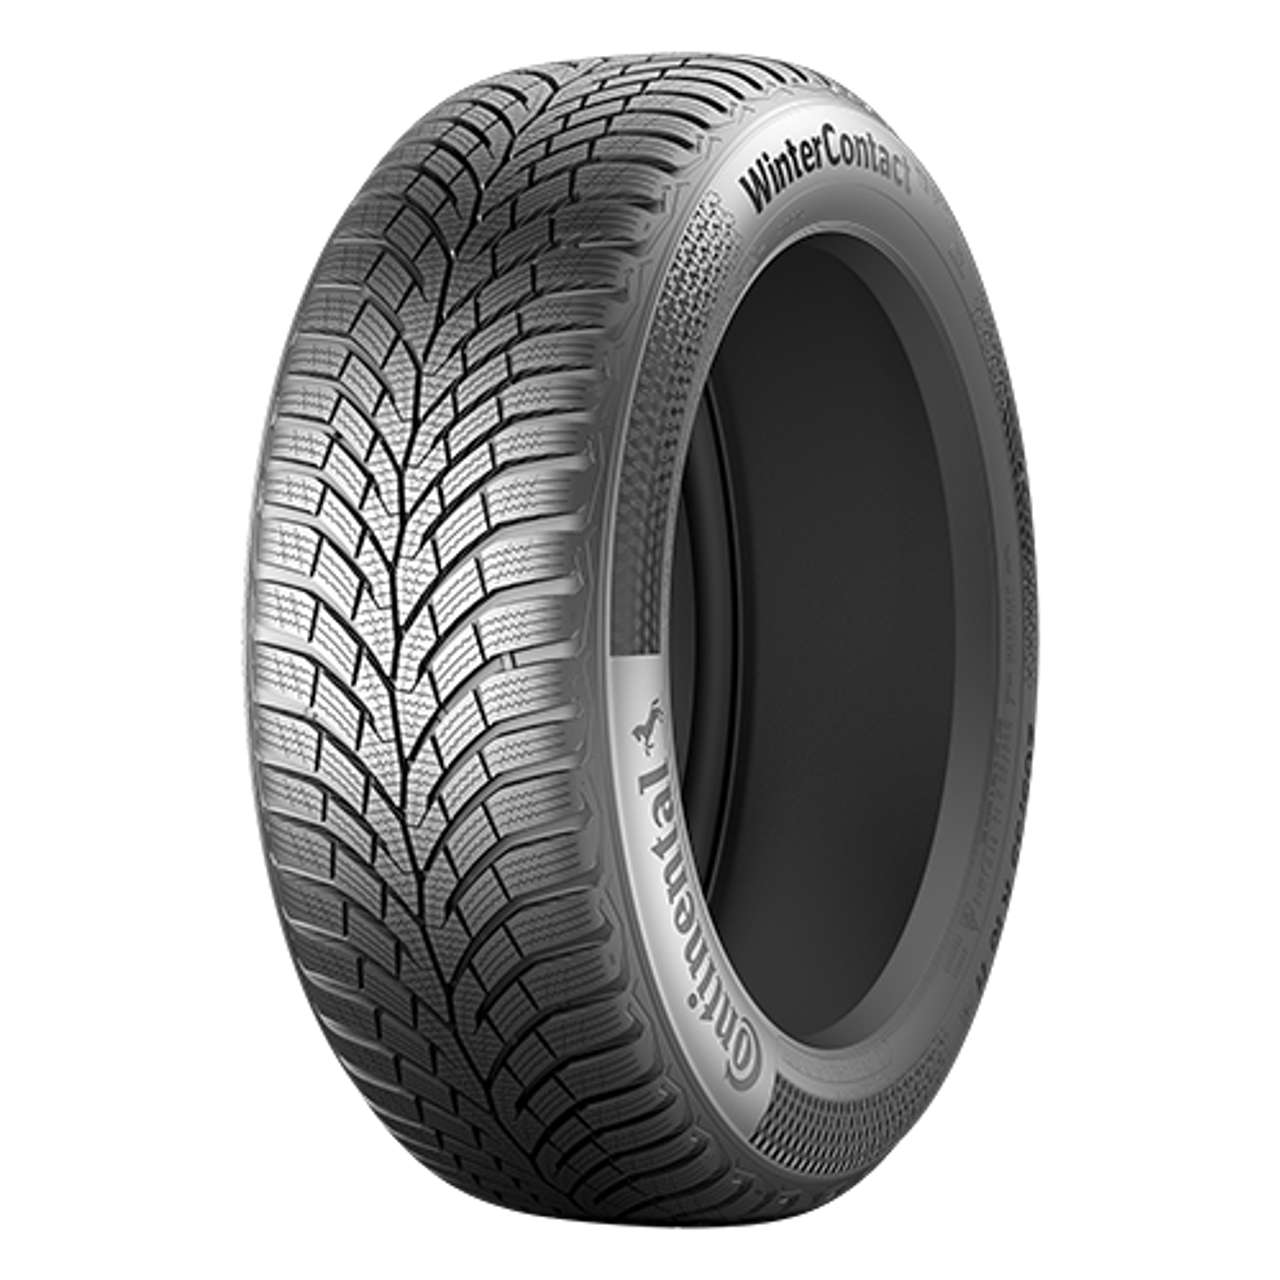 CONTINENTAL WINTERCONTACT TS 870 (EVc) 165/65R15 81T BSW von Continental